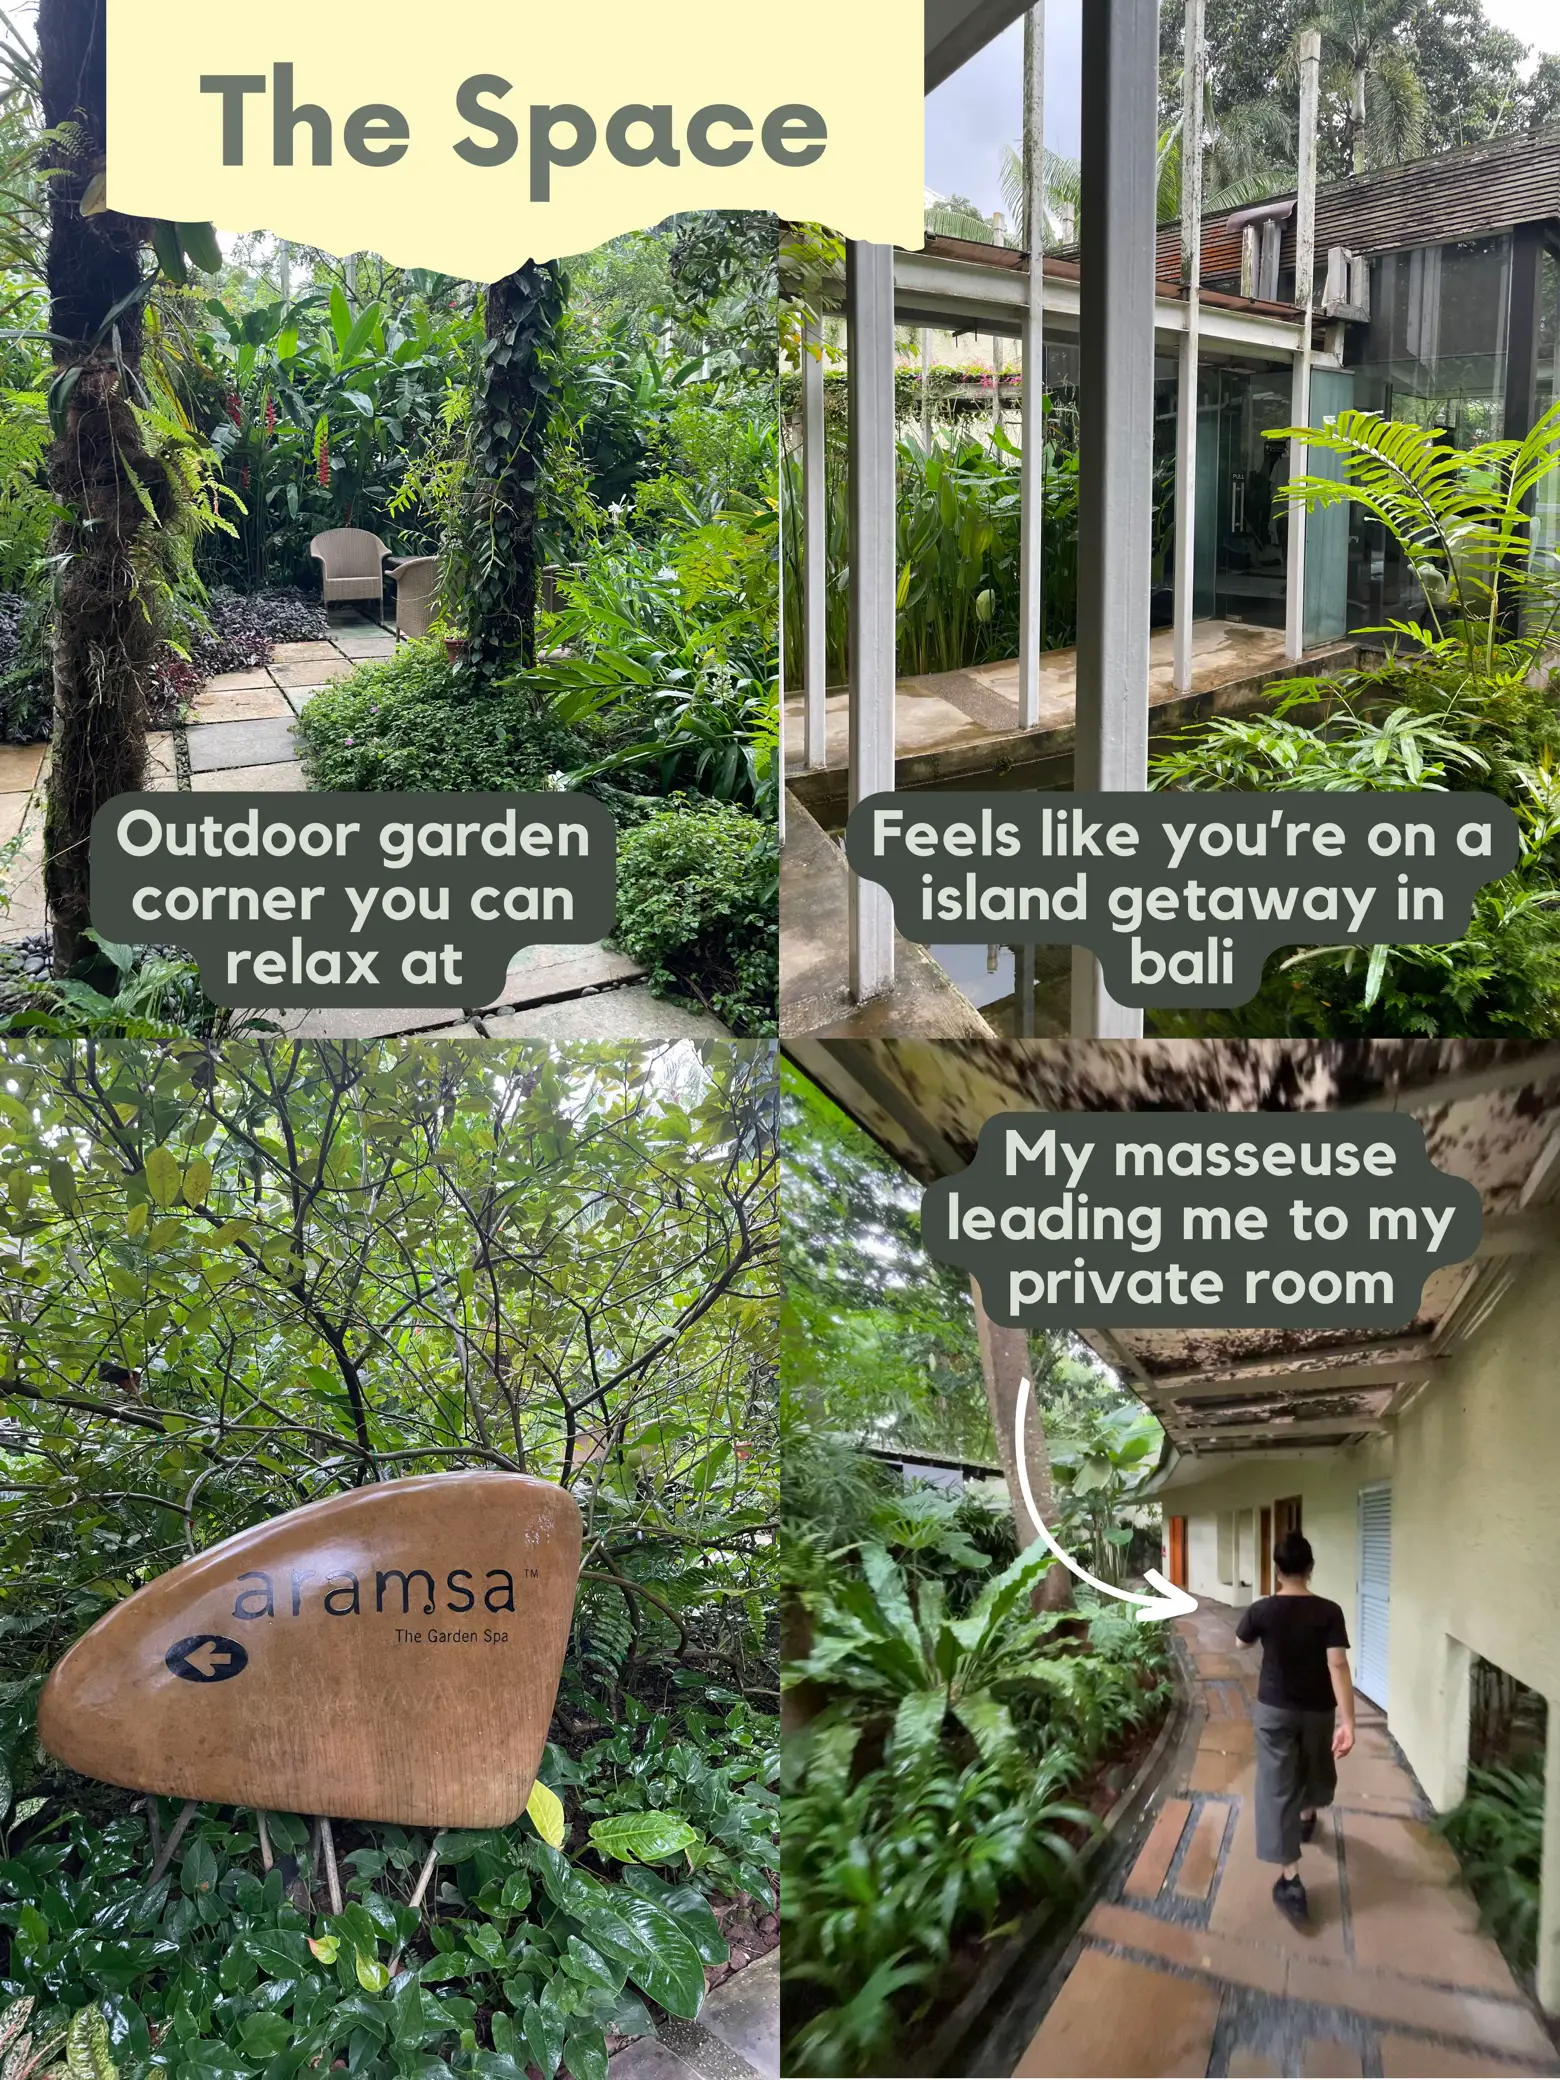 Fell asleep at this Garden Spa 🤤🍃 (affordable!!)'s images(2)